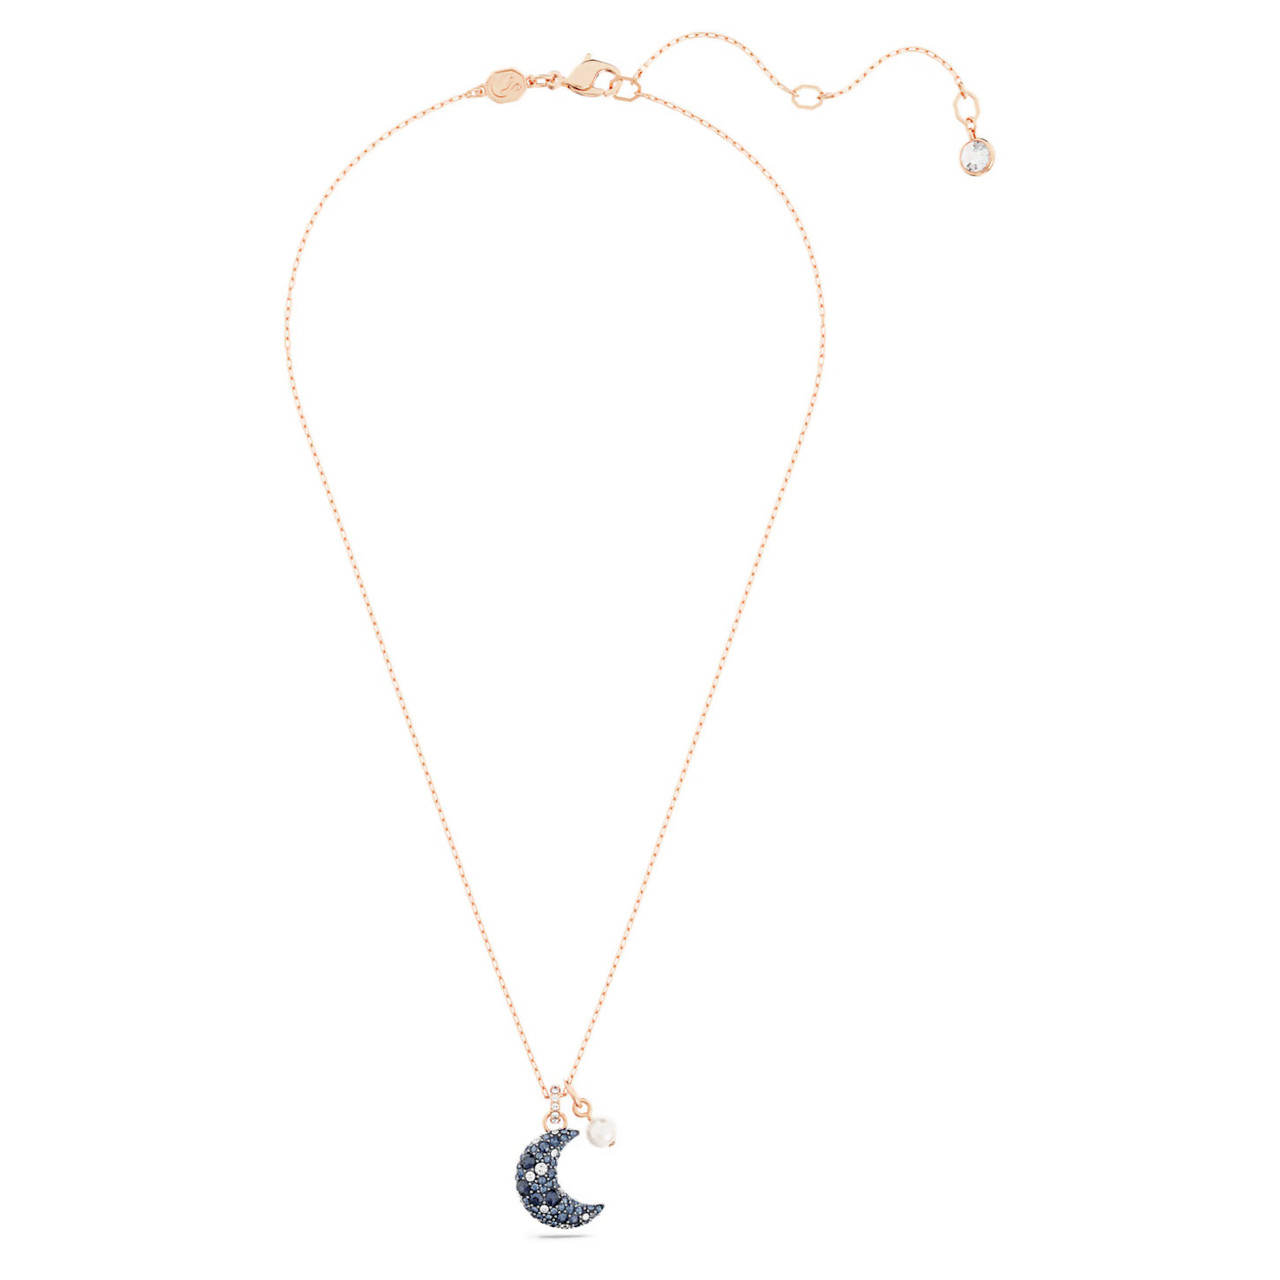 Blended Moon and Star Elements of Swarovski Necklace